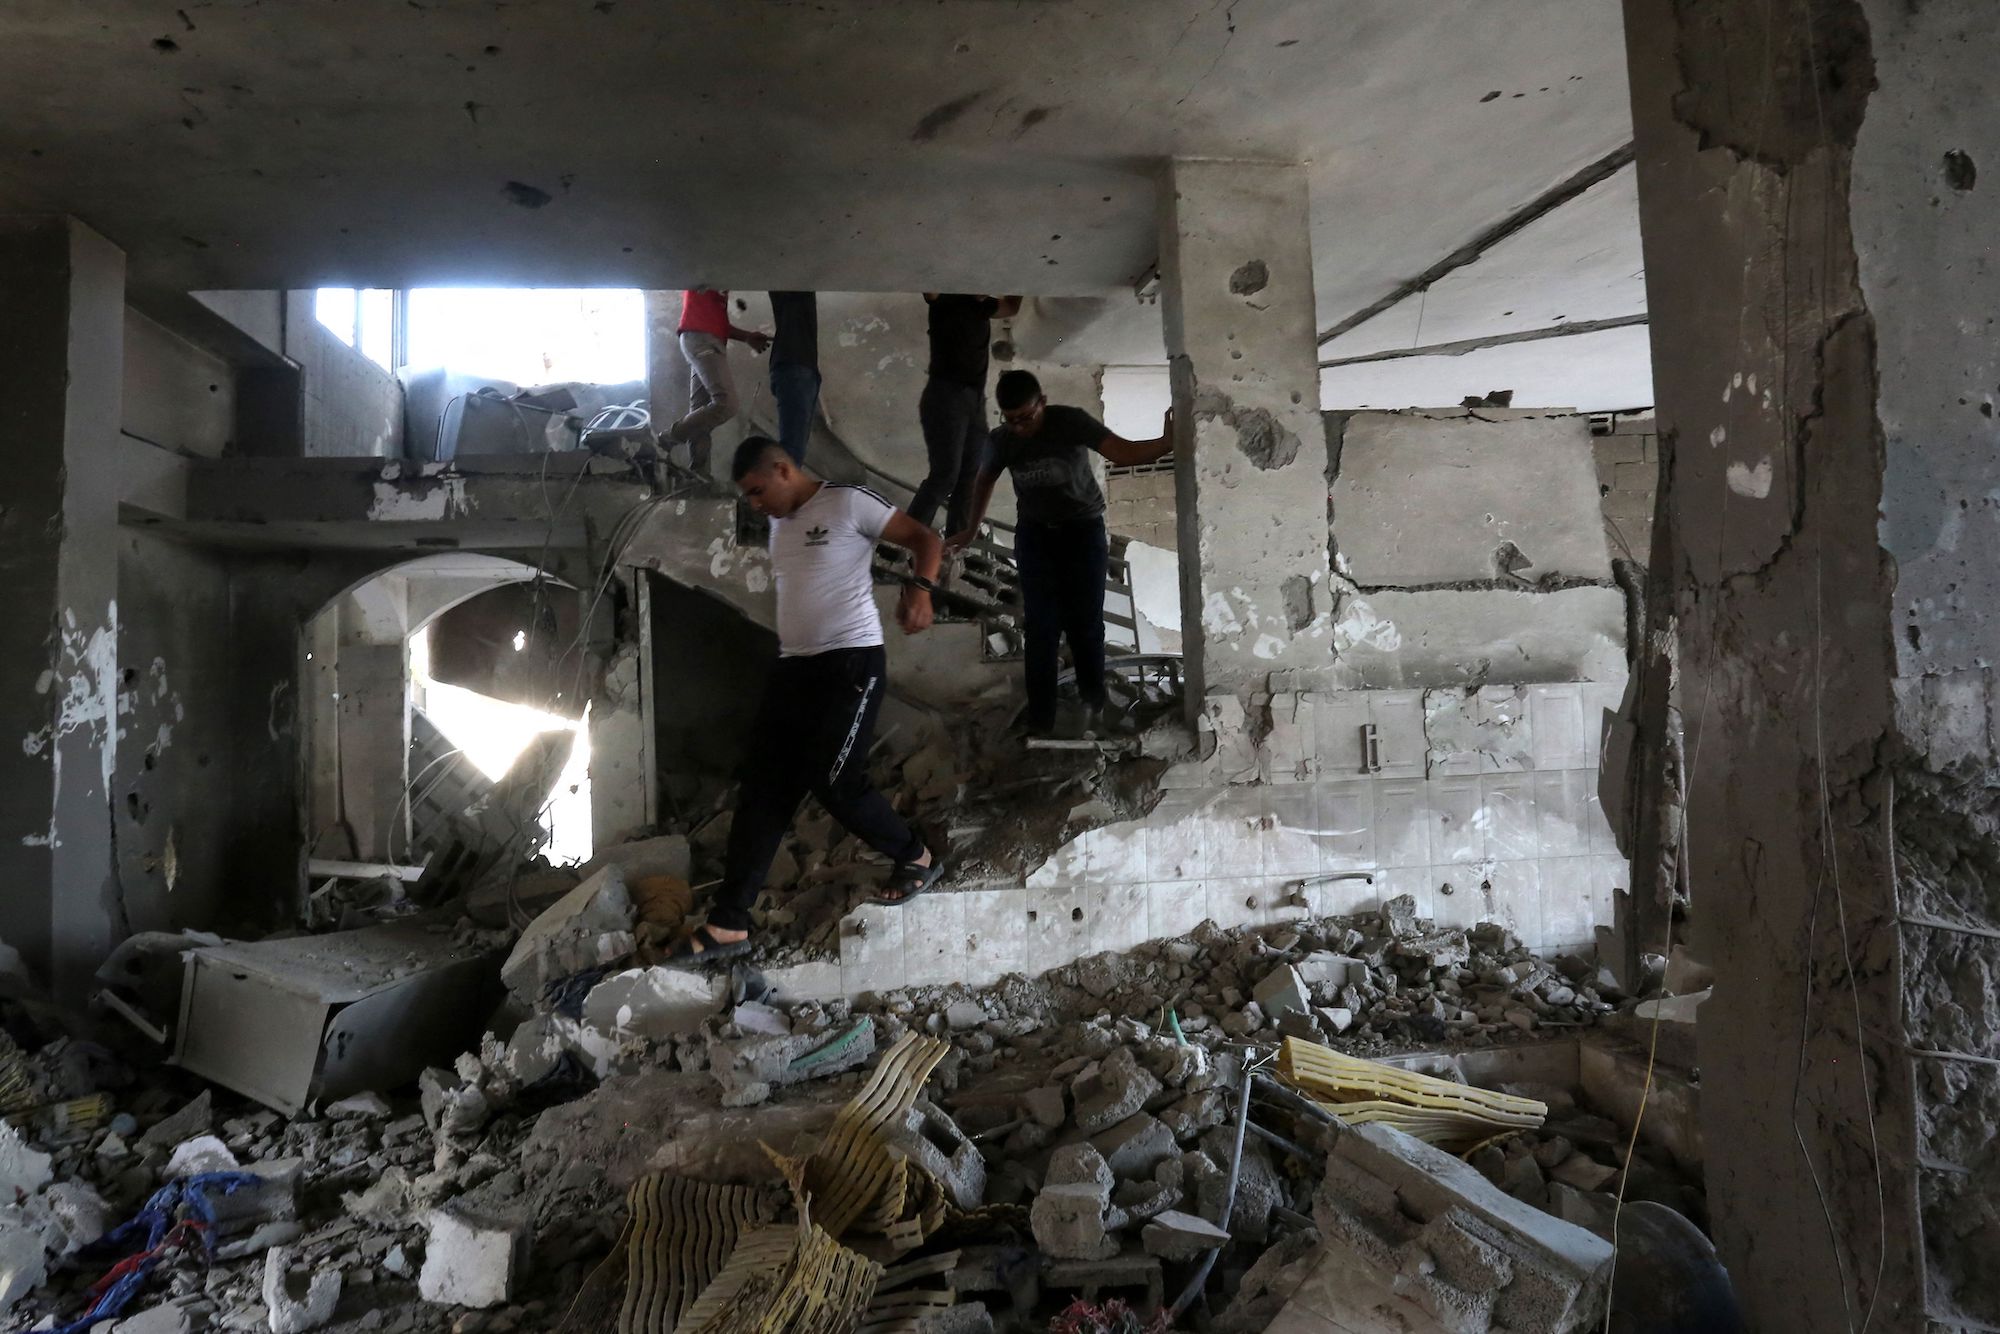 People check the damage inside a building in the West Bank city of Jenin, following an Israeli airstrike on Sunday.